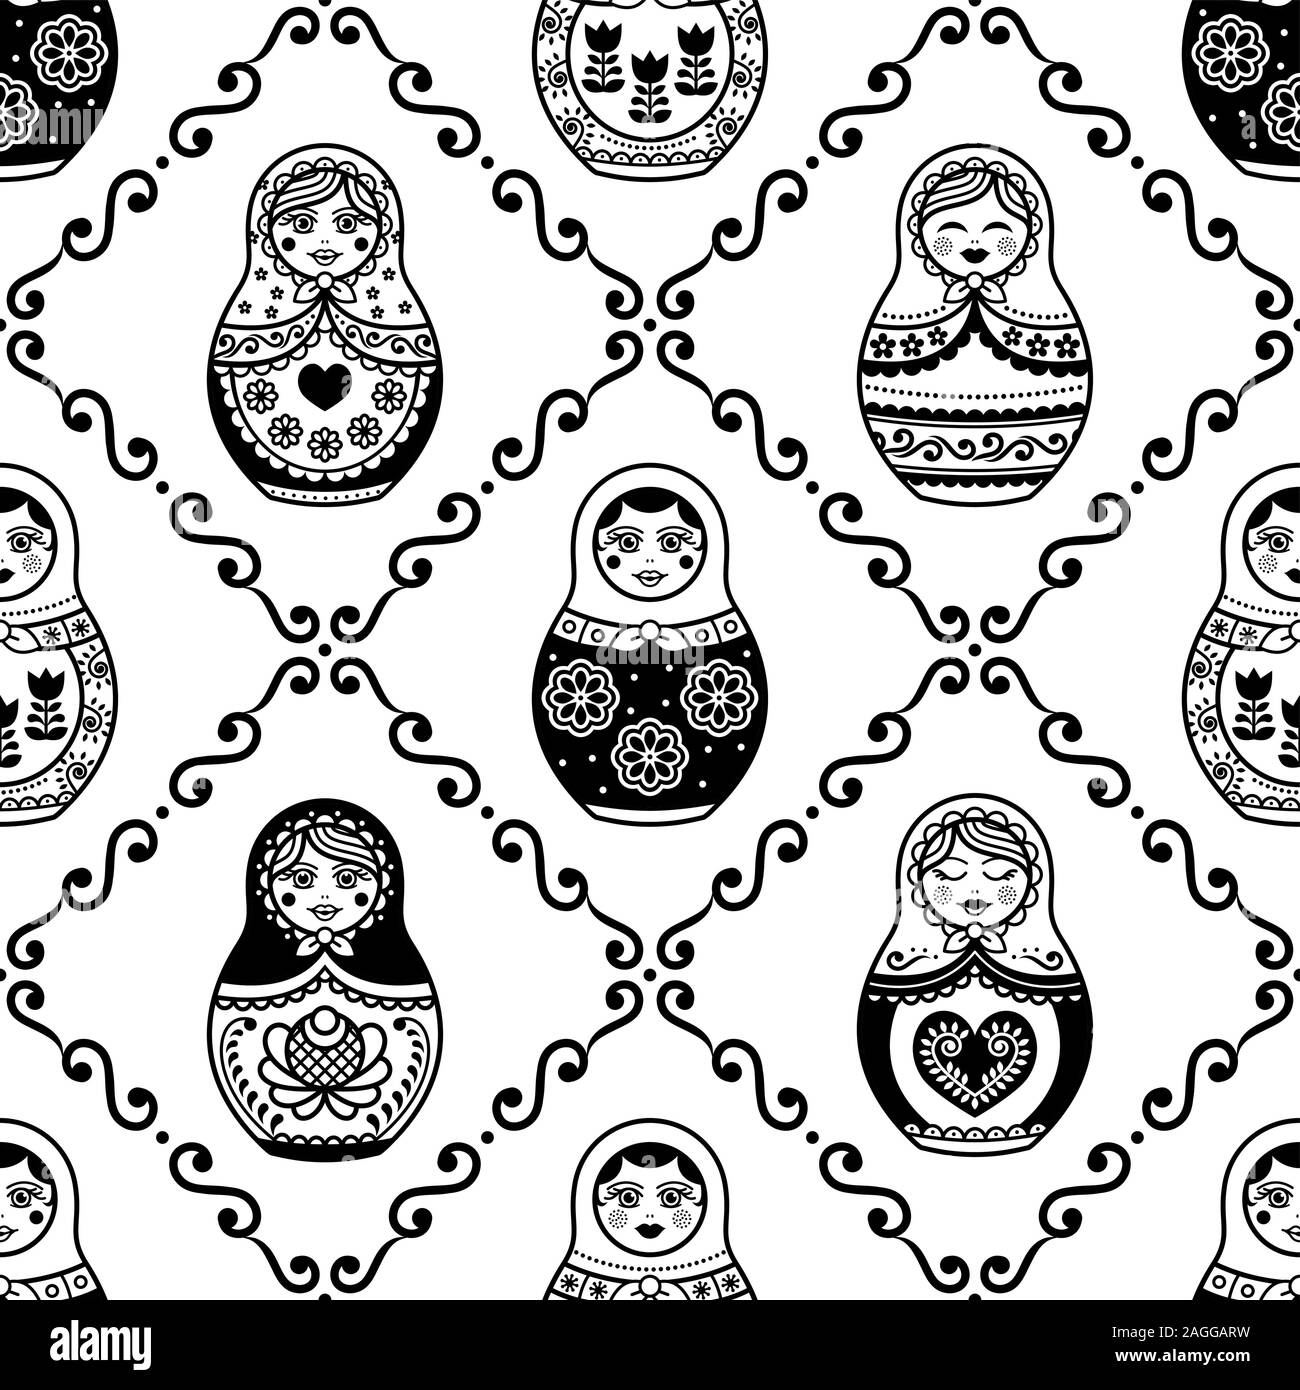 Russian nesting doll vector seamless pattern, repetitive design inpisred by Matryoshka dolls from Russia Stock Vector